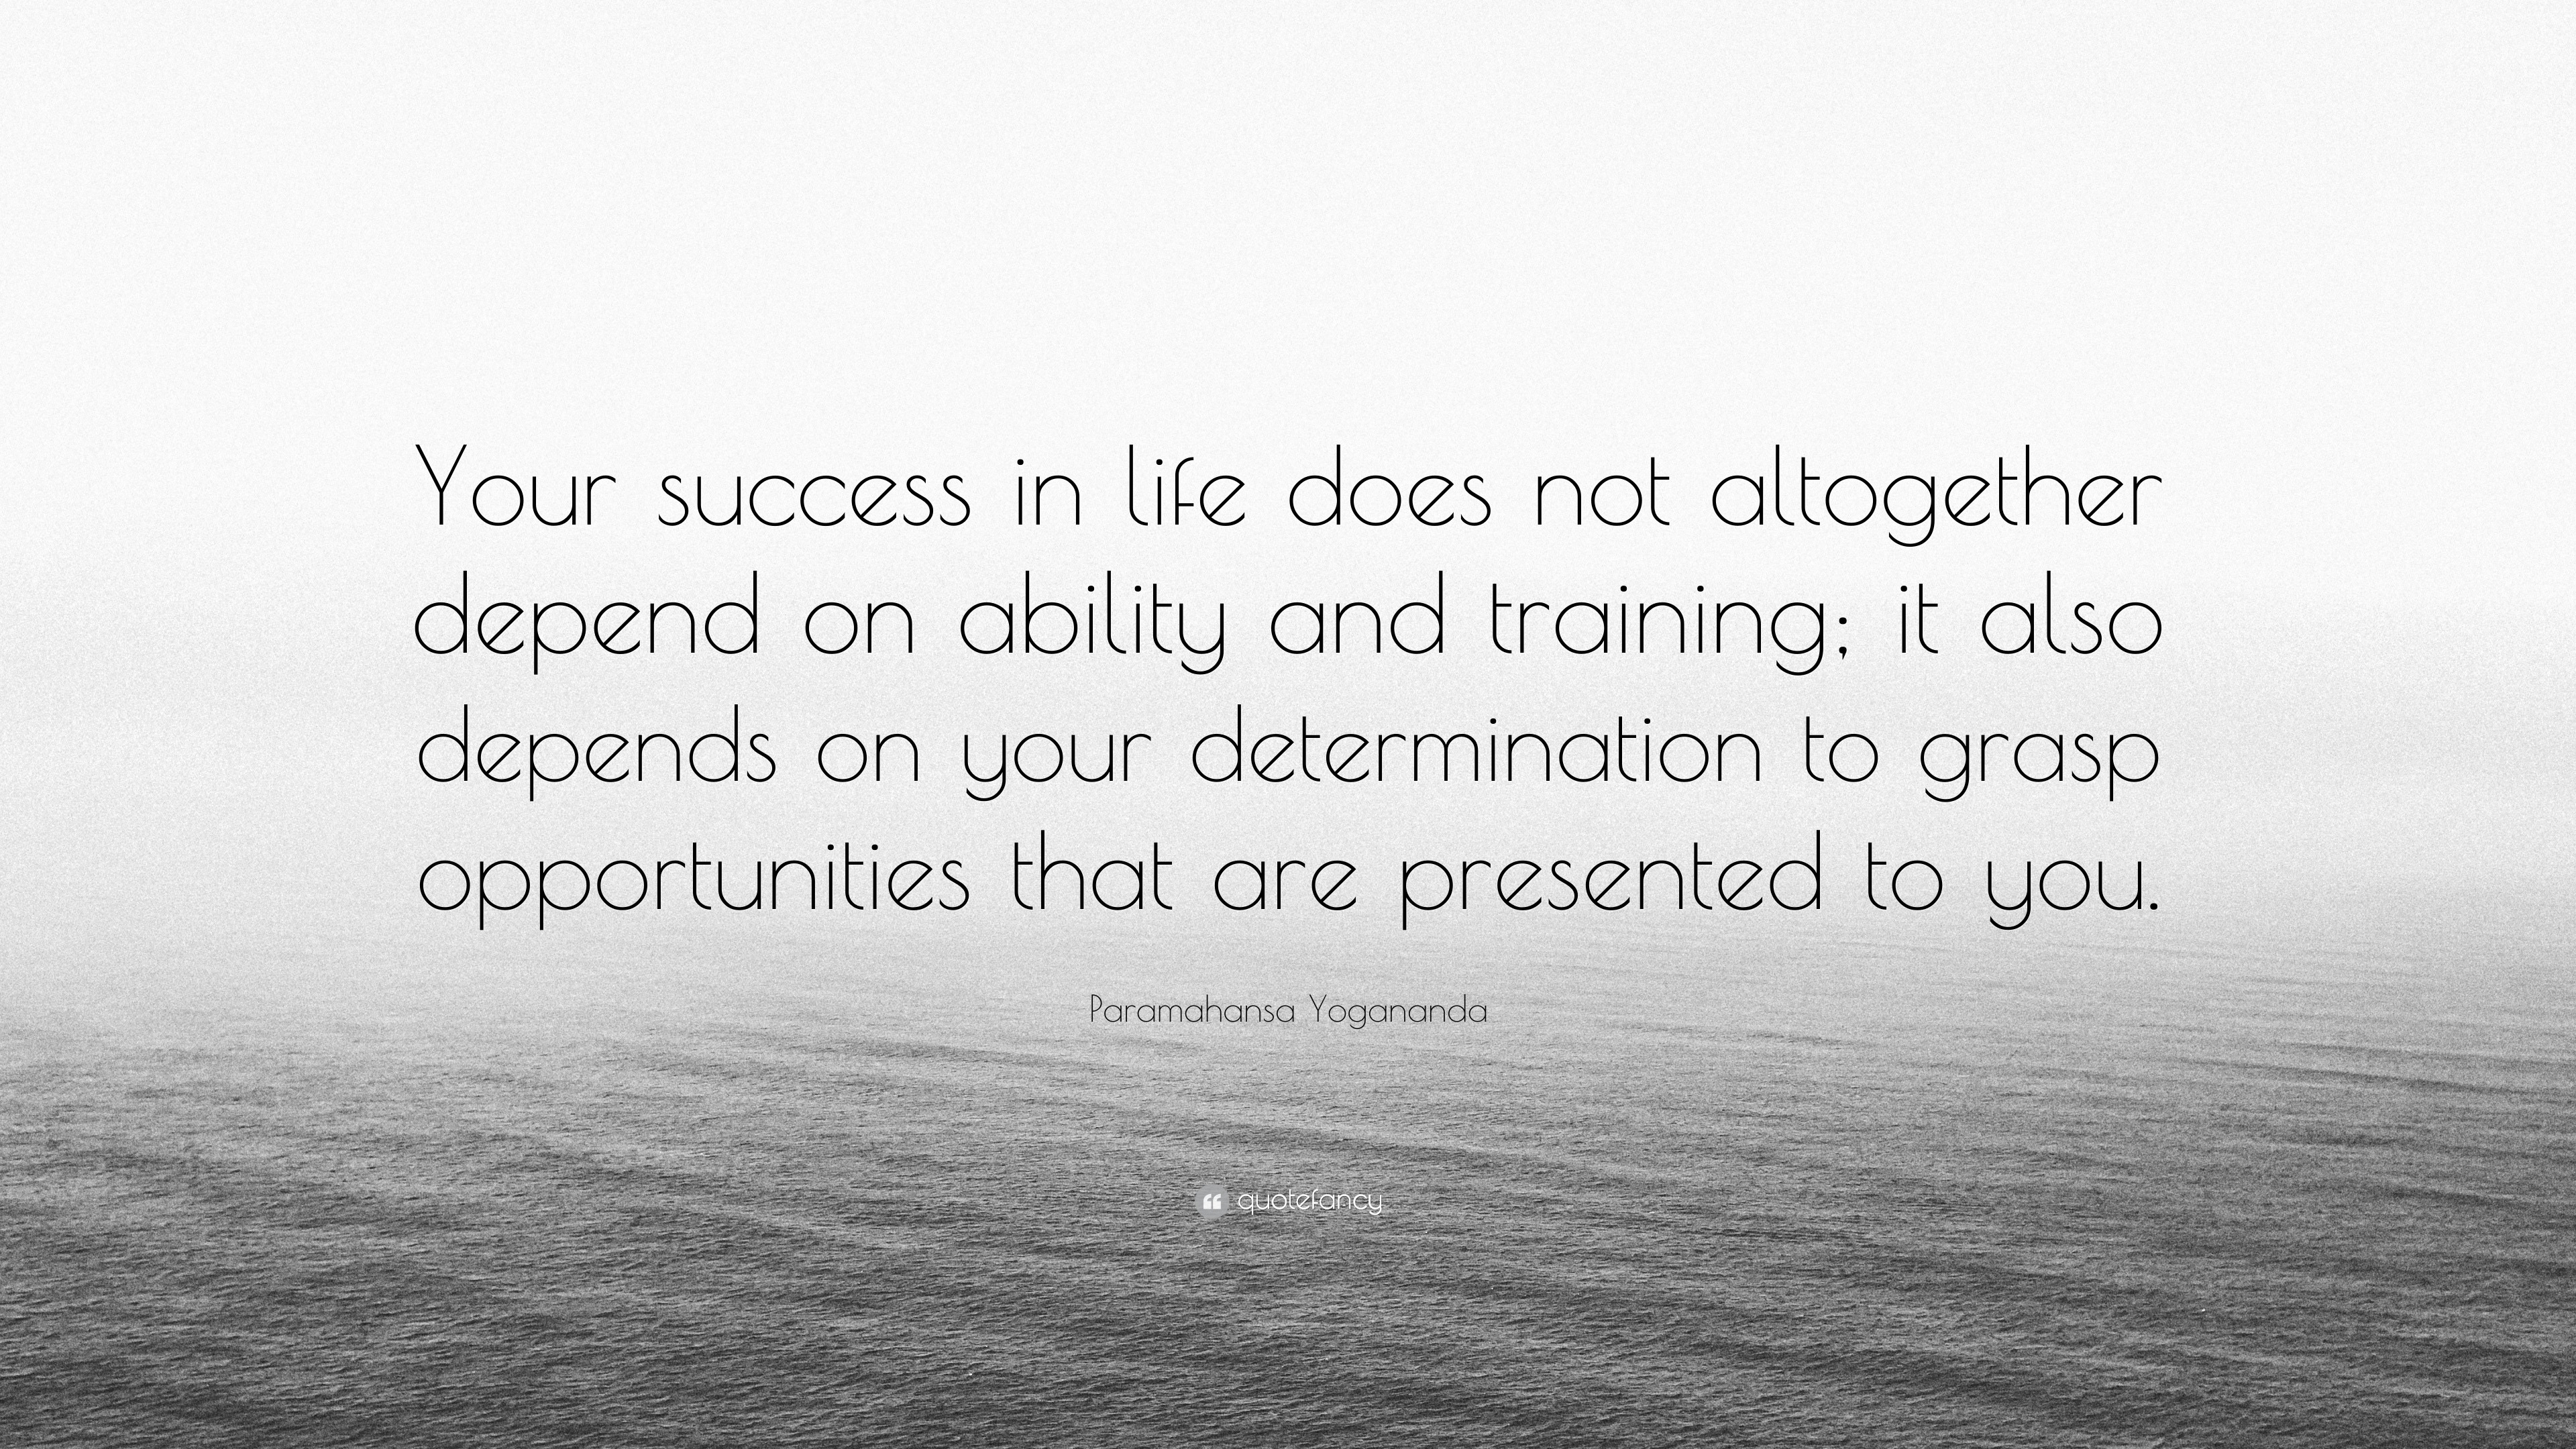 Paramahansa Yogananda Quote: “Your success in life does not altogether ...